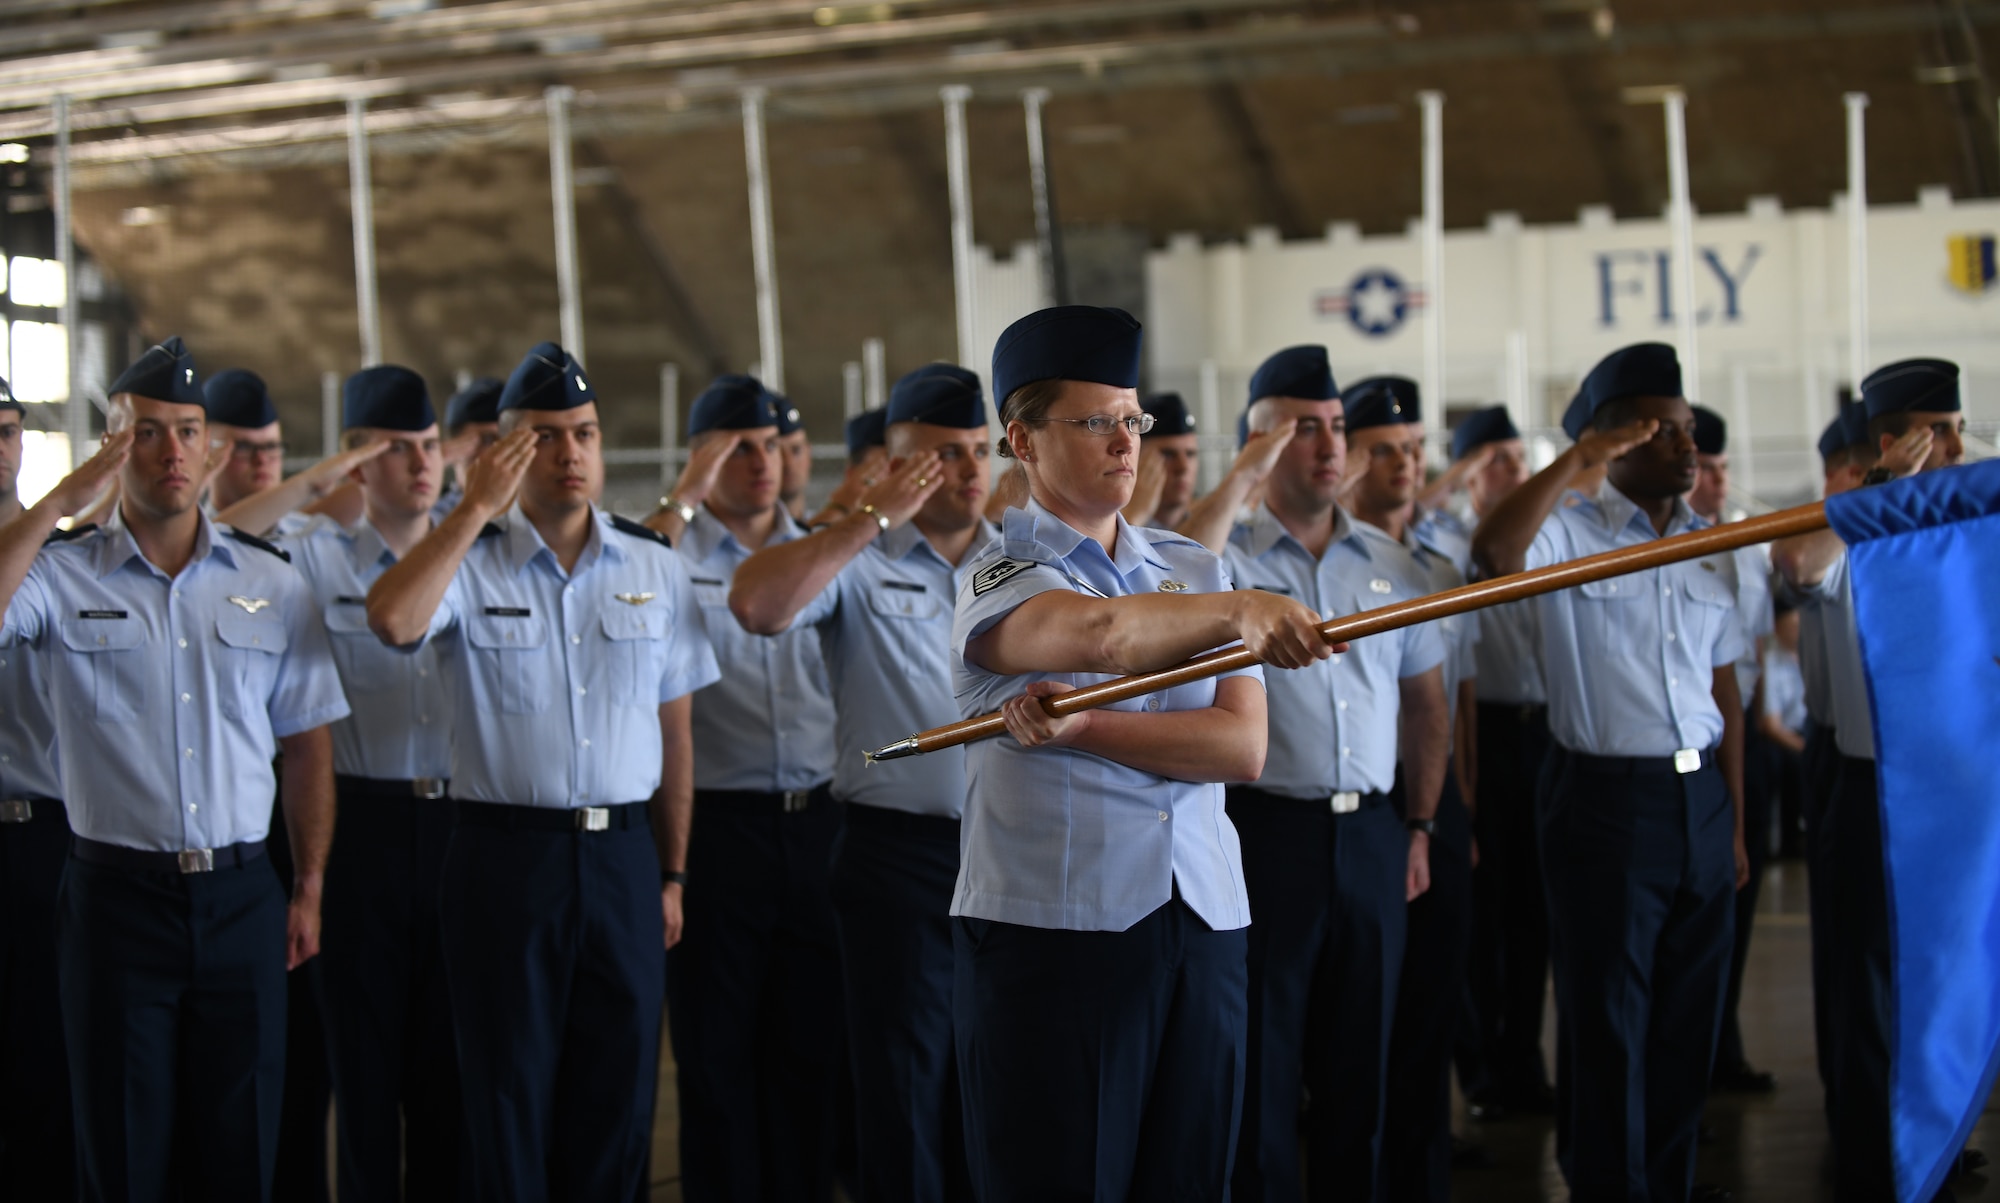 A formation of Airmen from the 28th Operations Group render a salute during a change of command ceremony at Ellsworth Air Force Base, S.D., May 30, 2019. The ceremony is a time-honored military tradition that serves as representation of the exchange of responsibility and authority from one commander to another. (U.S. Air Force photo by Airman 1st Class Christina Bennett)